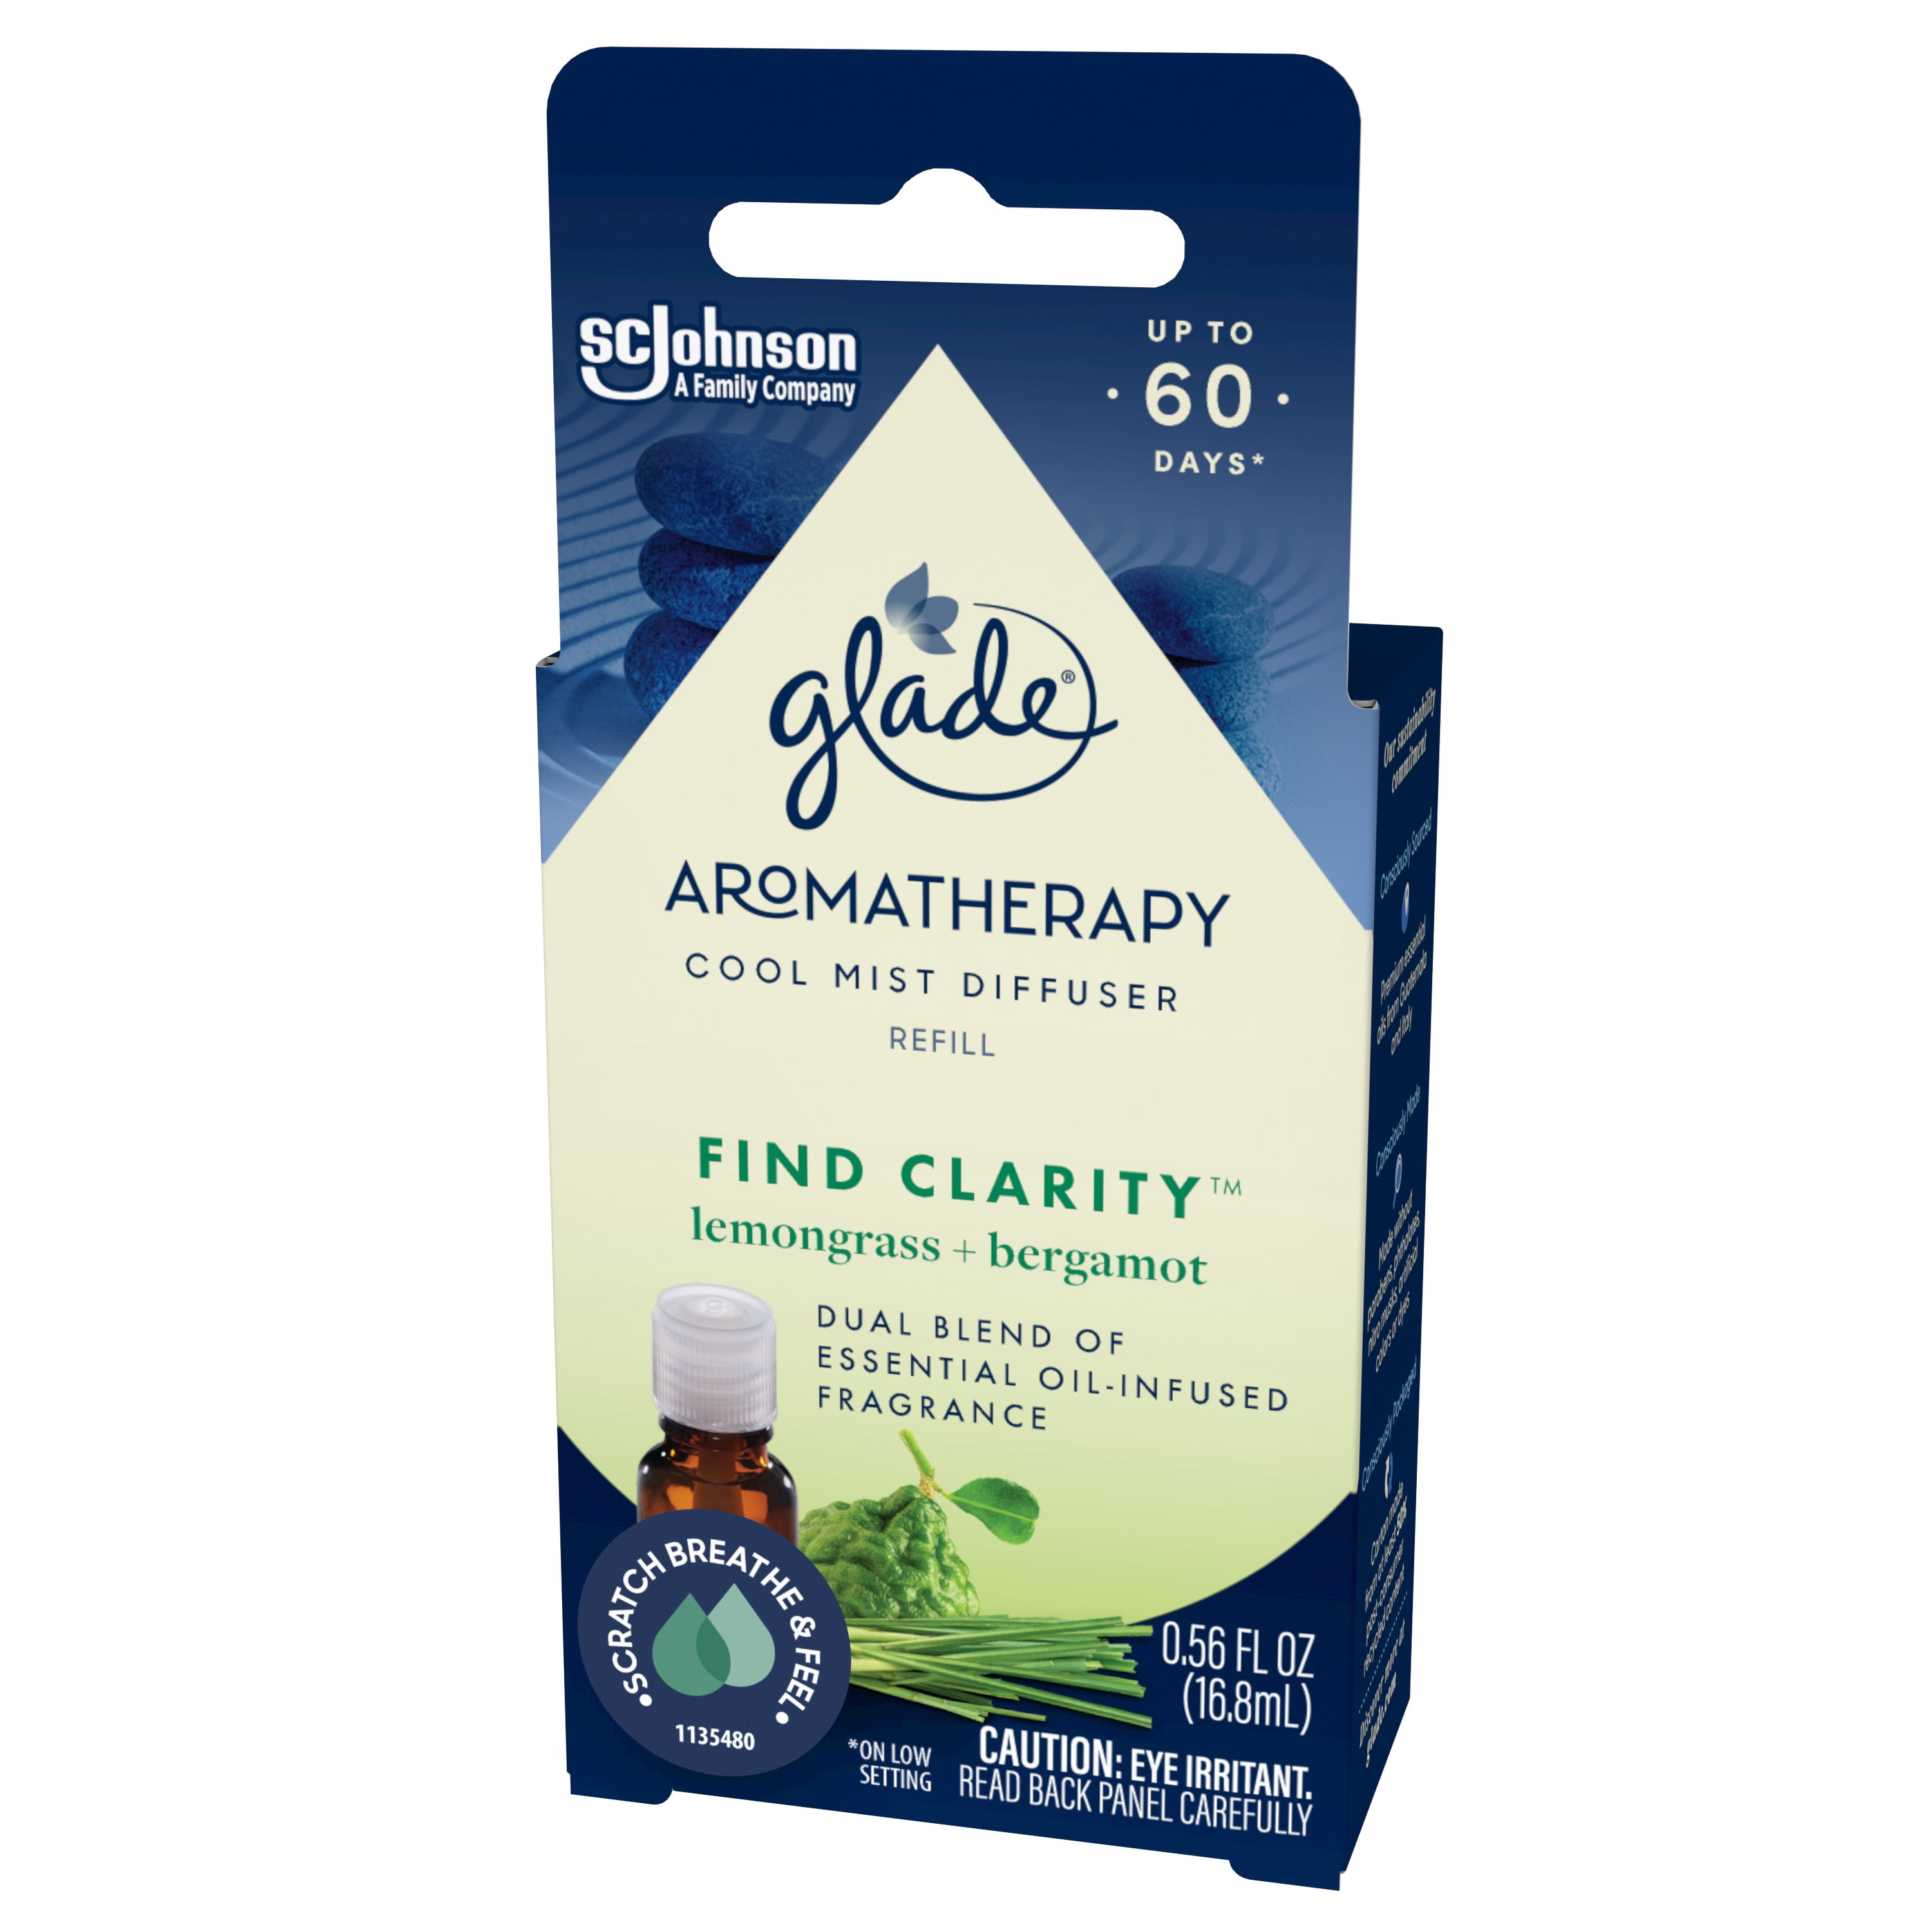 Glade Aromatherapy Essential Oils Duftkerze Pure Happiness, Glade®